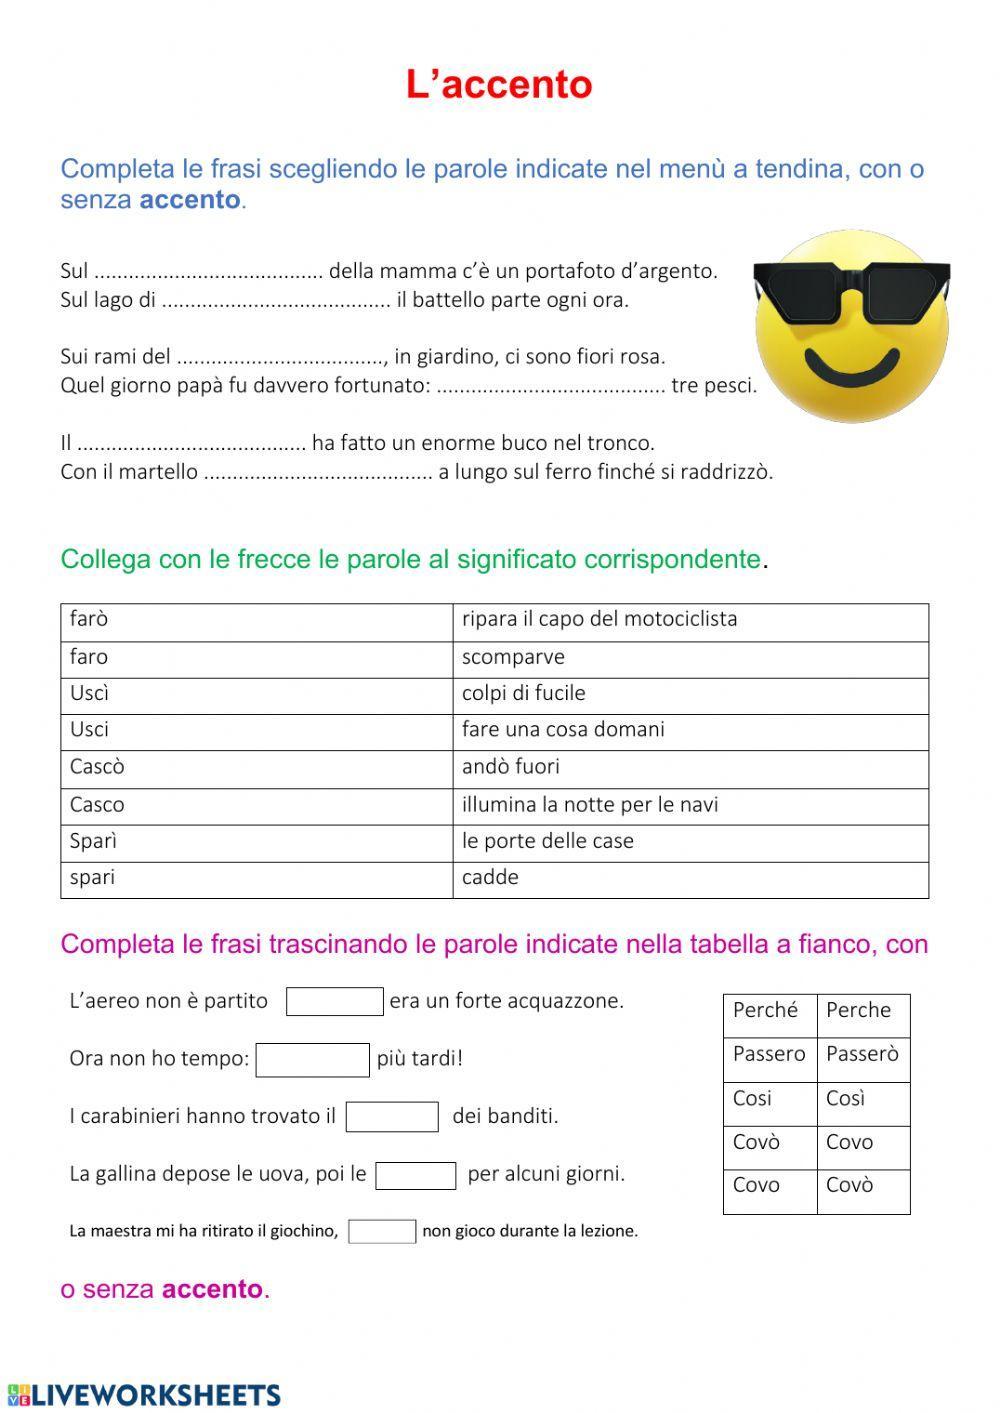 Accento activity | Live Worksheets